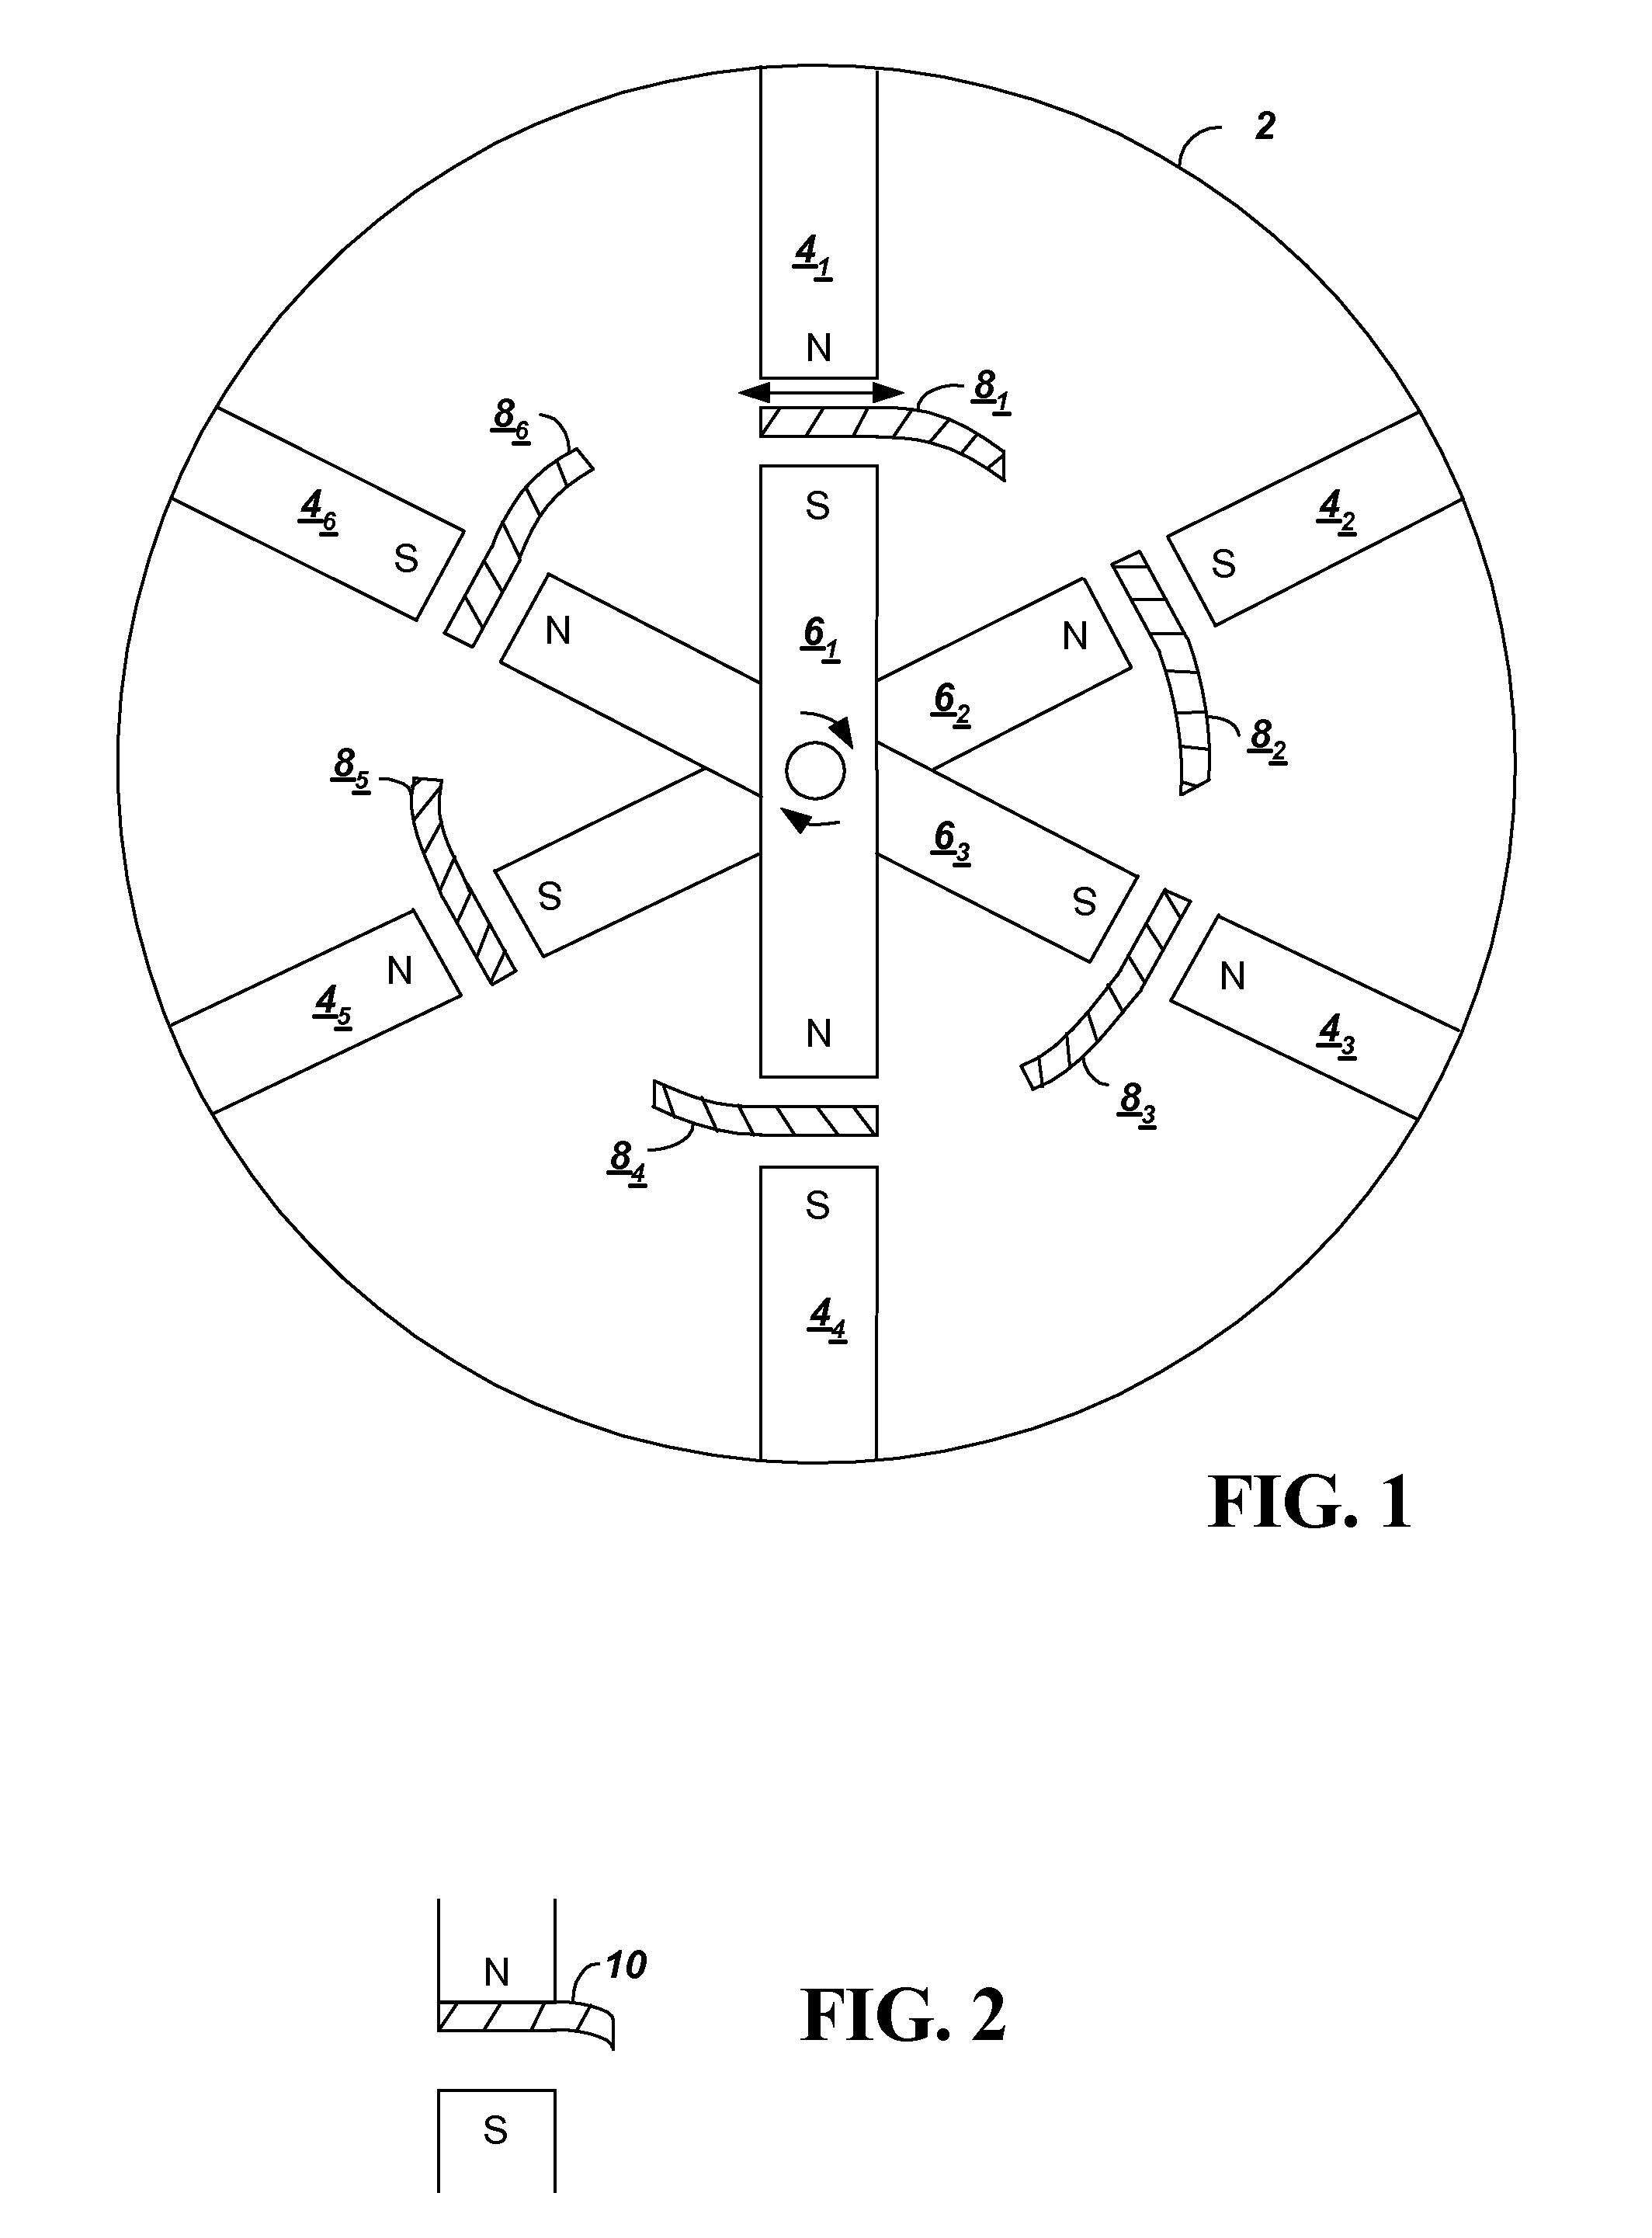 Mass magnifier using magnetic fields and mu-metal to provide an energy storage flywheel for use in conventional, microtechnology, and nanotechnology engines